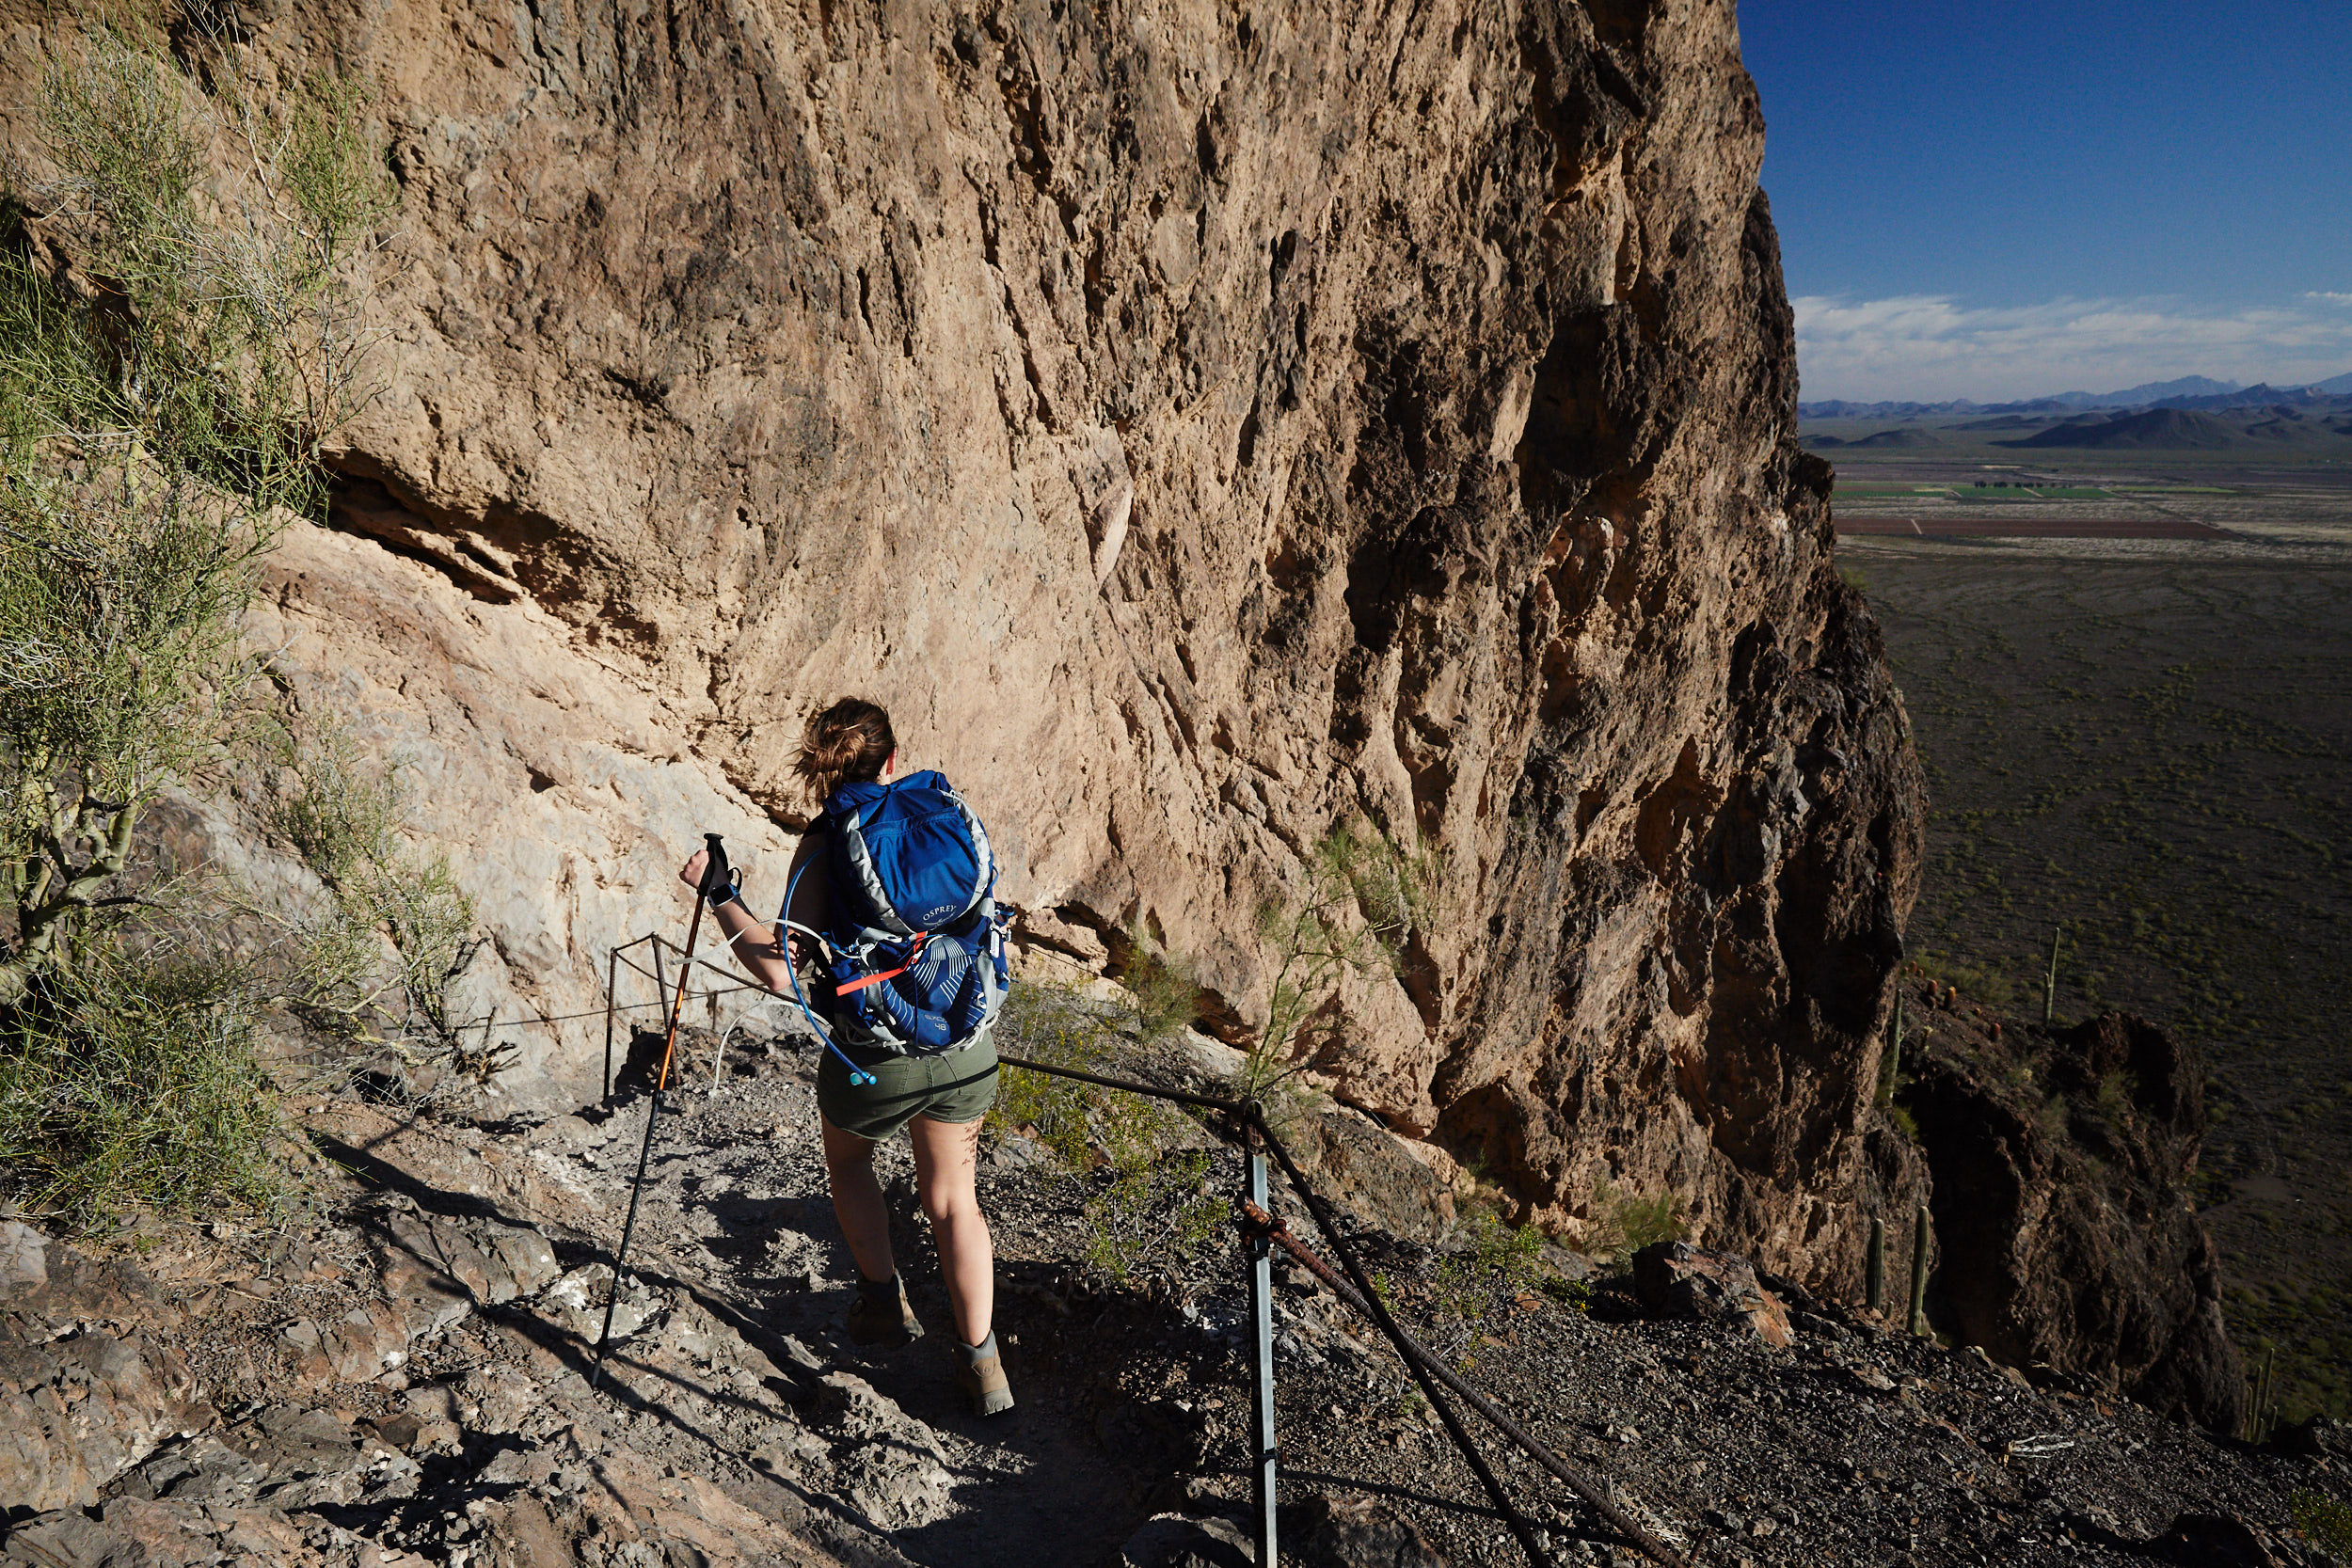  It’s a sustained fairly steep climb up some switch backs till you reach the first rock wall. 